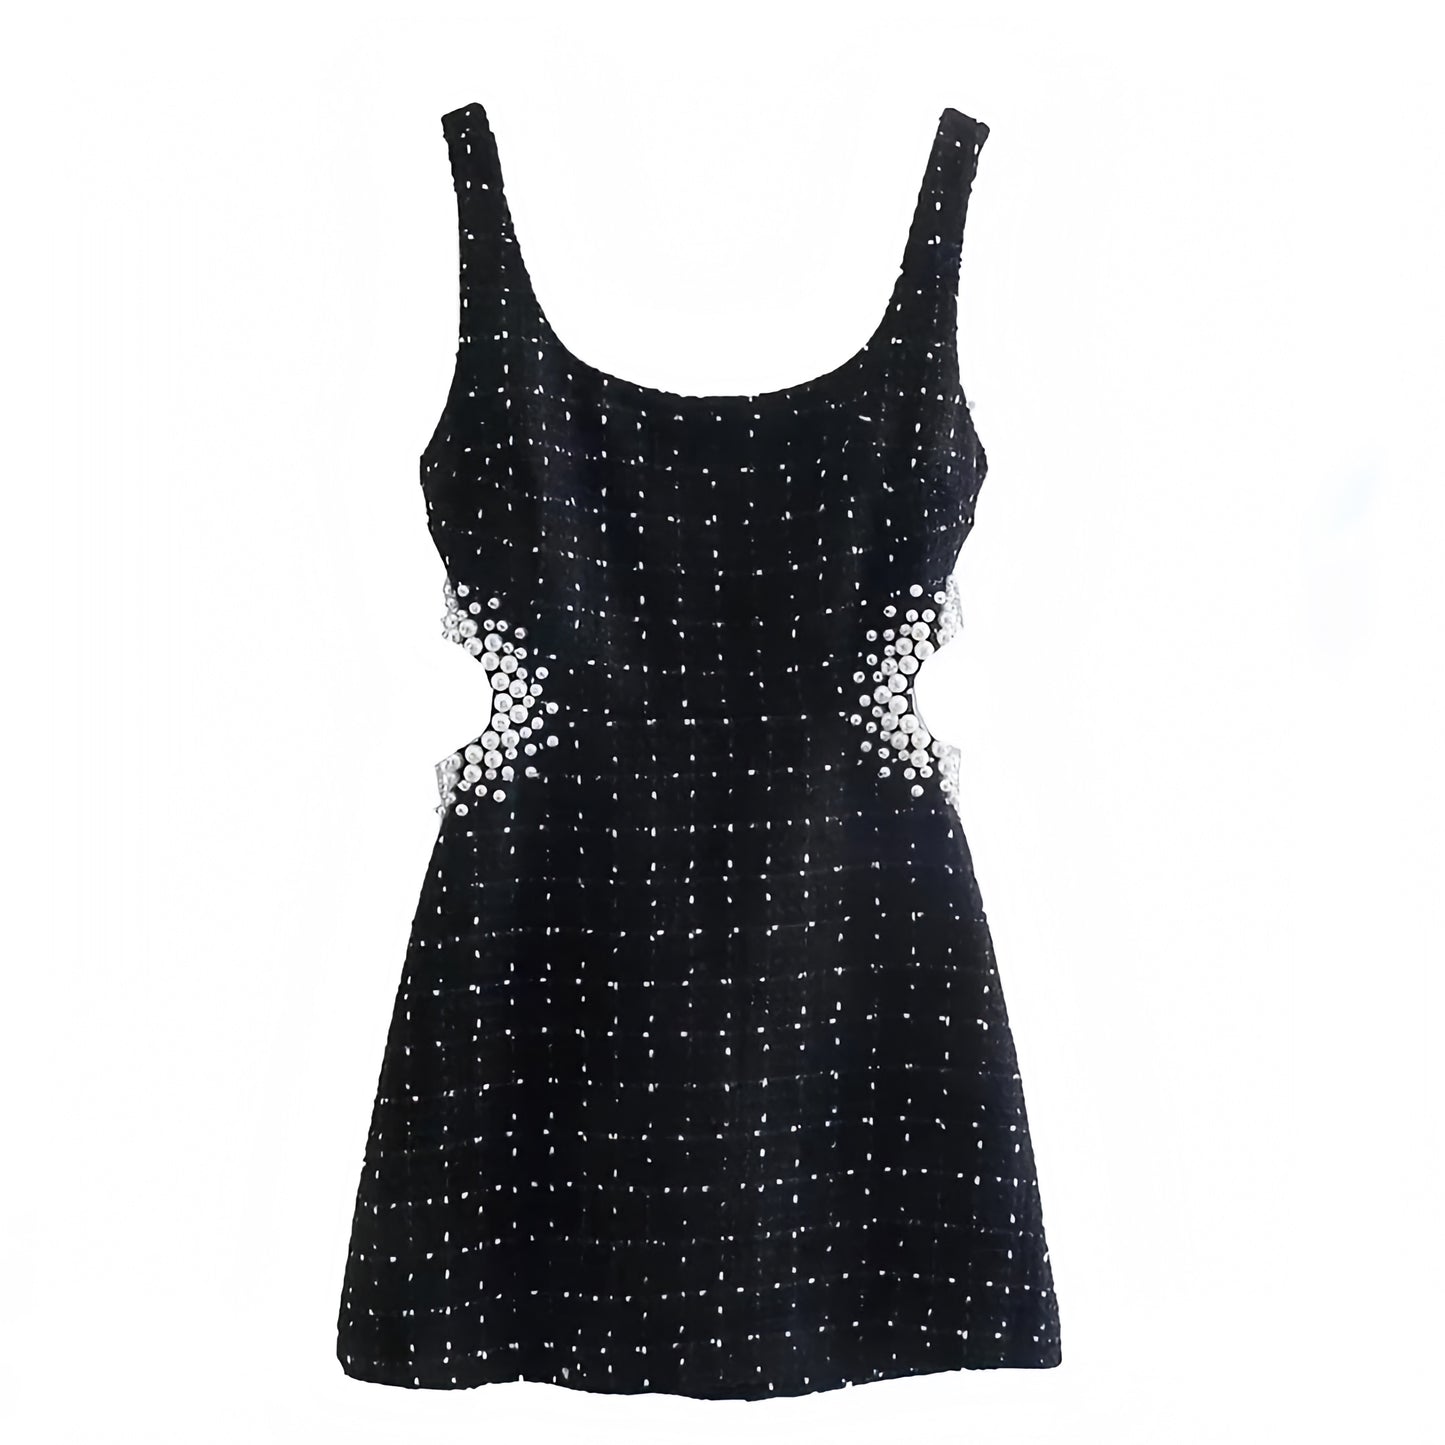 black-silver-crystal-rhinestone-pearl-embellished-embroidered-glitter-sparkle-slim-fit-scoop-neck-spaghetti-strap-bodycon-cut-out-tweed-short-sleeve-mini-dress-chic-trendy-spring-2024-summer-women-ladies-party-prom-elegant-formal-gala-date-night-club-wear-parisian-style-european-couture-sexy-evening-gown-old-money-quiet-luxury-revolve-zara-asos-reformation